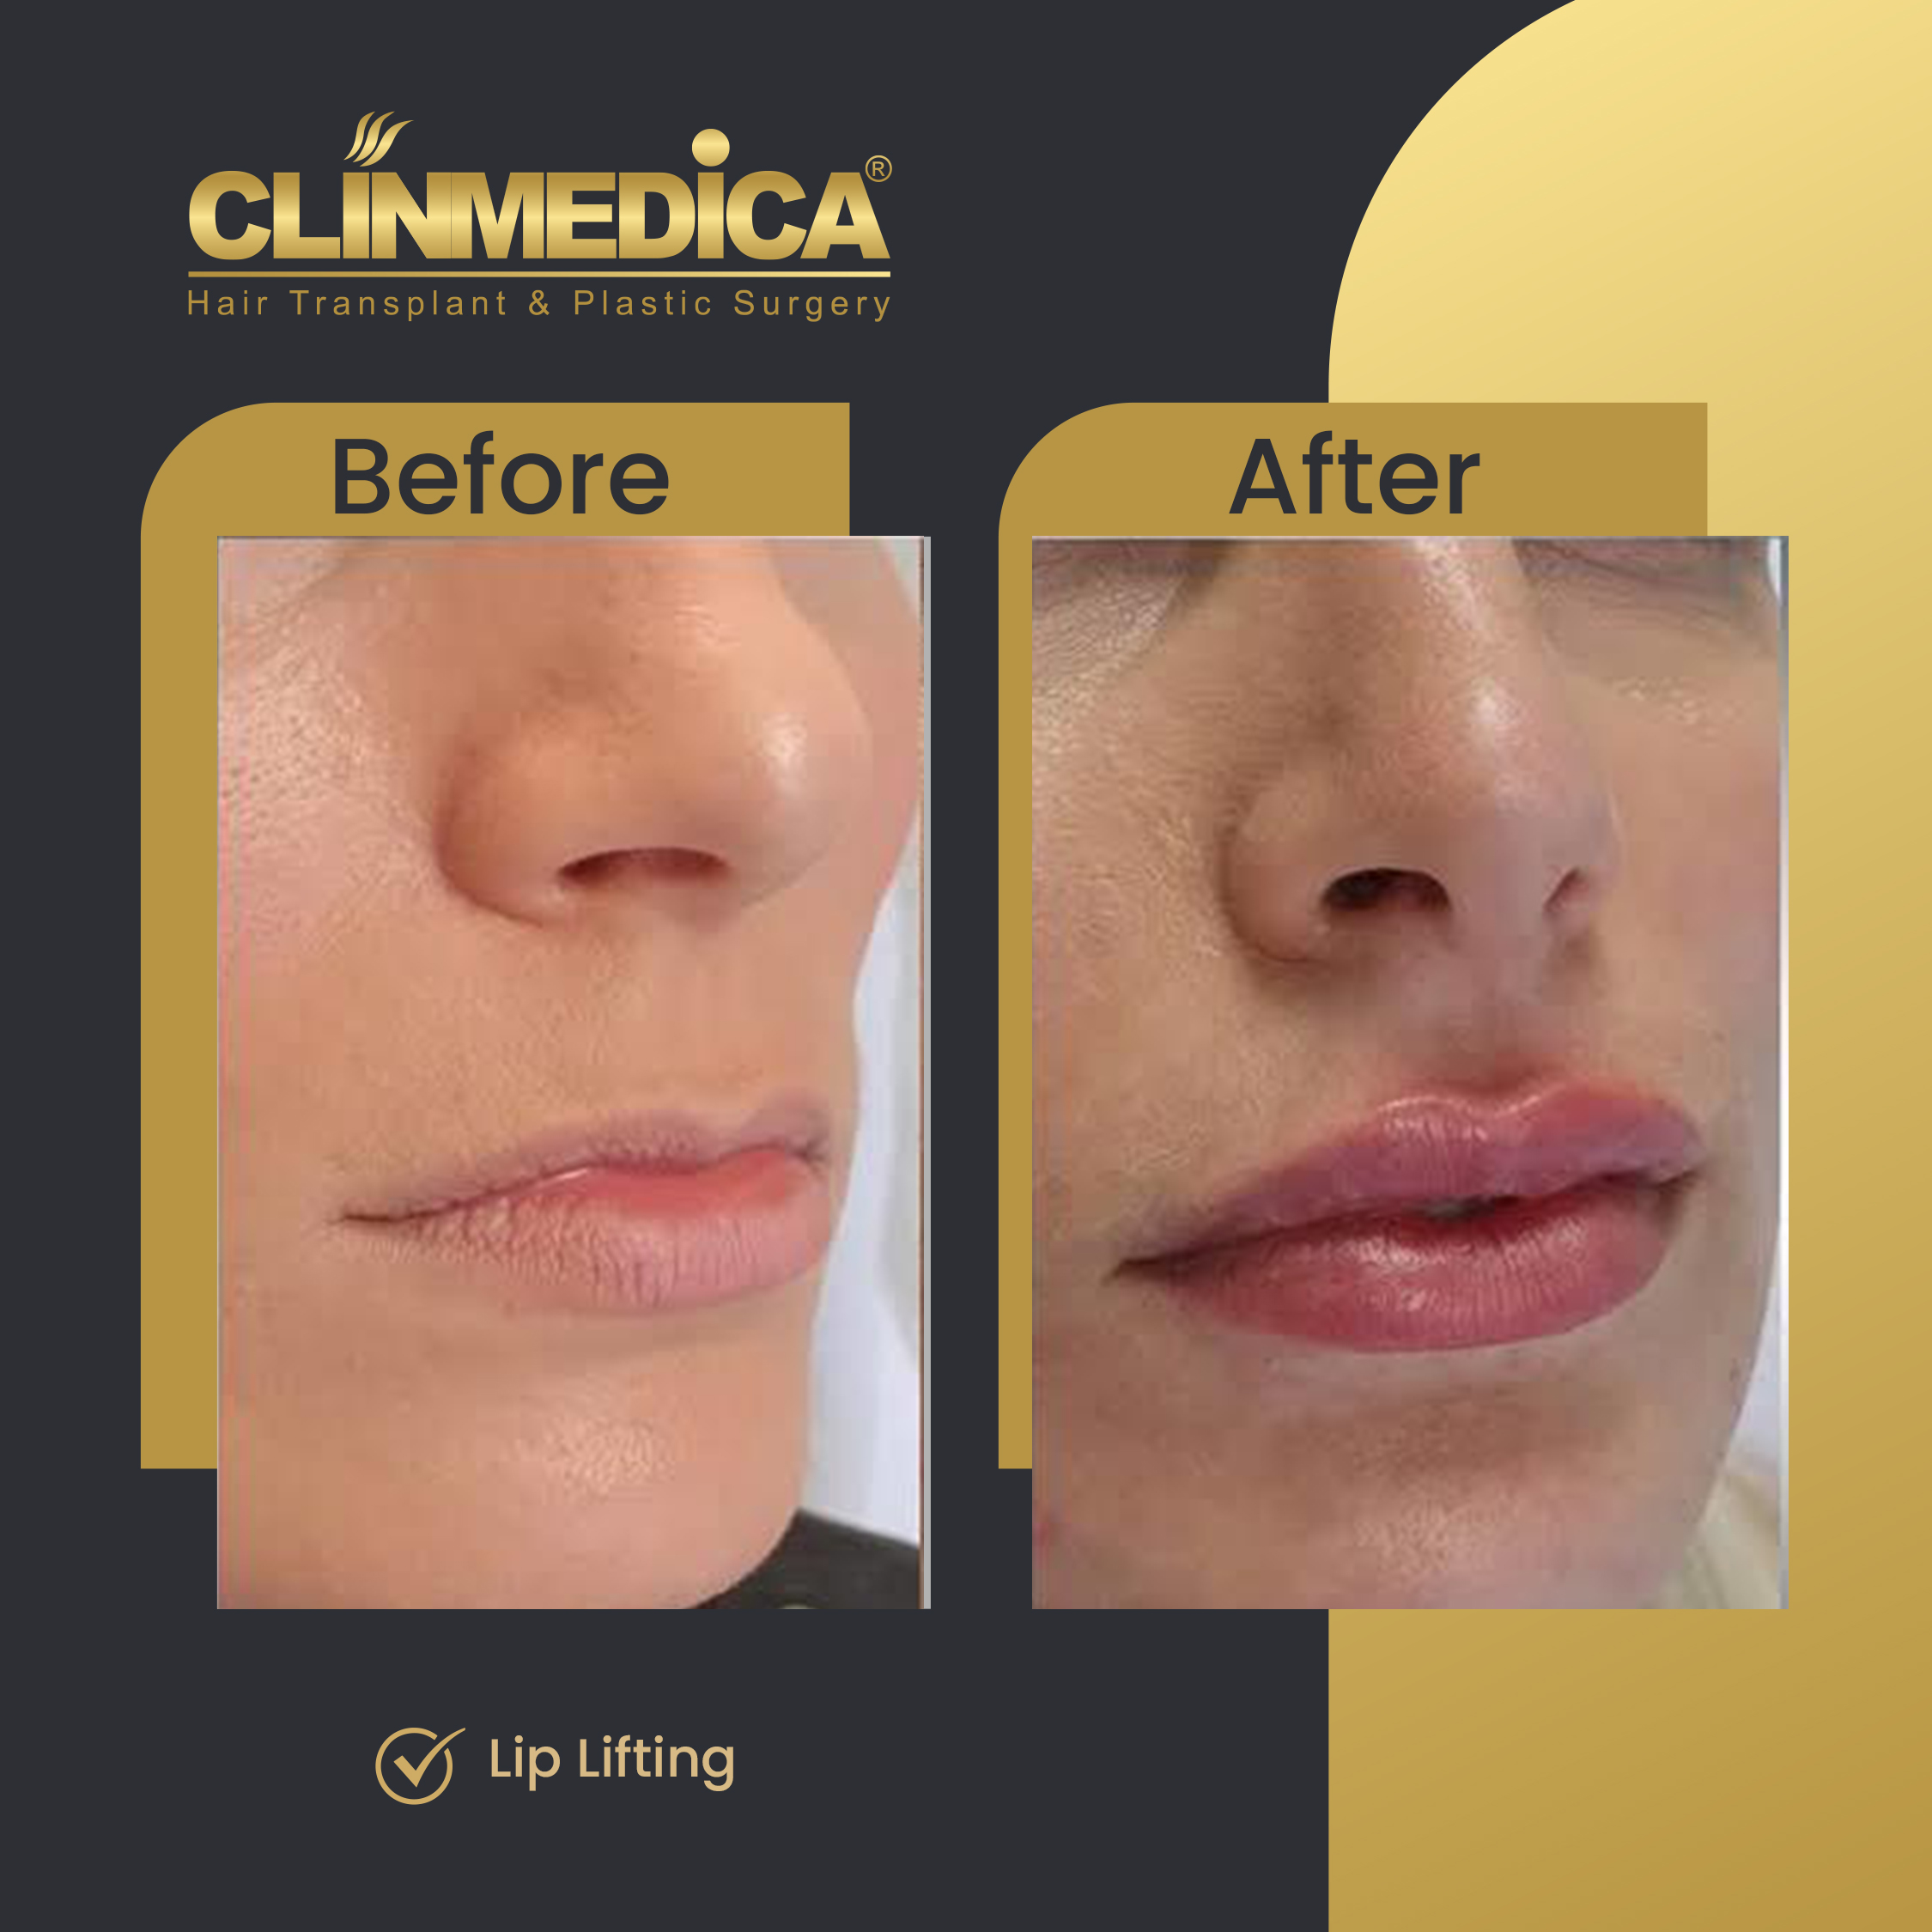 Lip Lifting before and after in Turkey